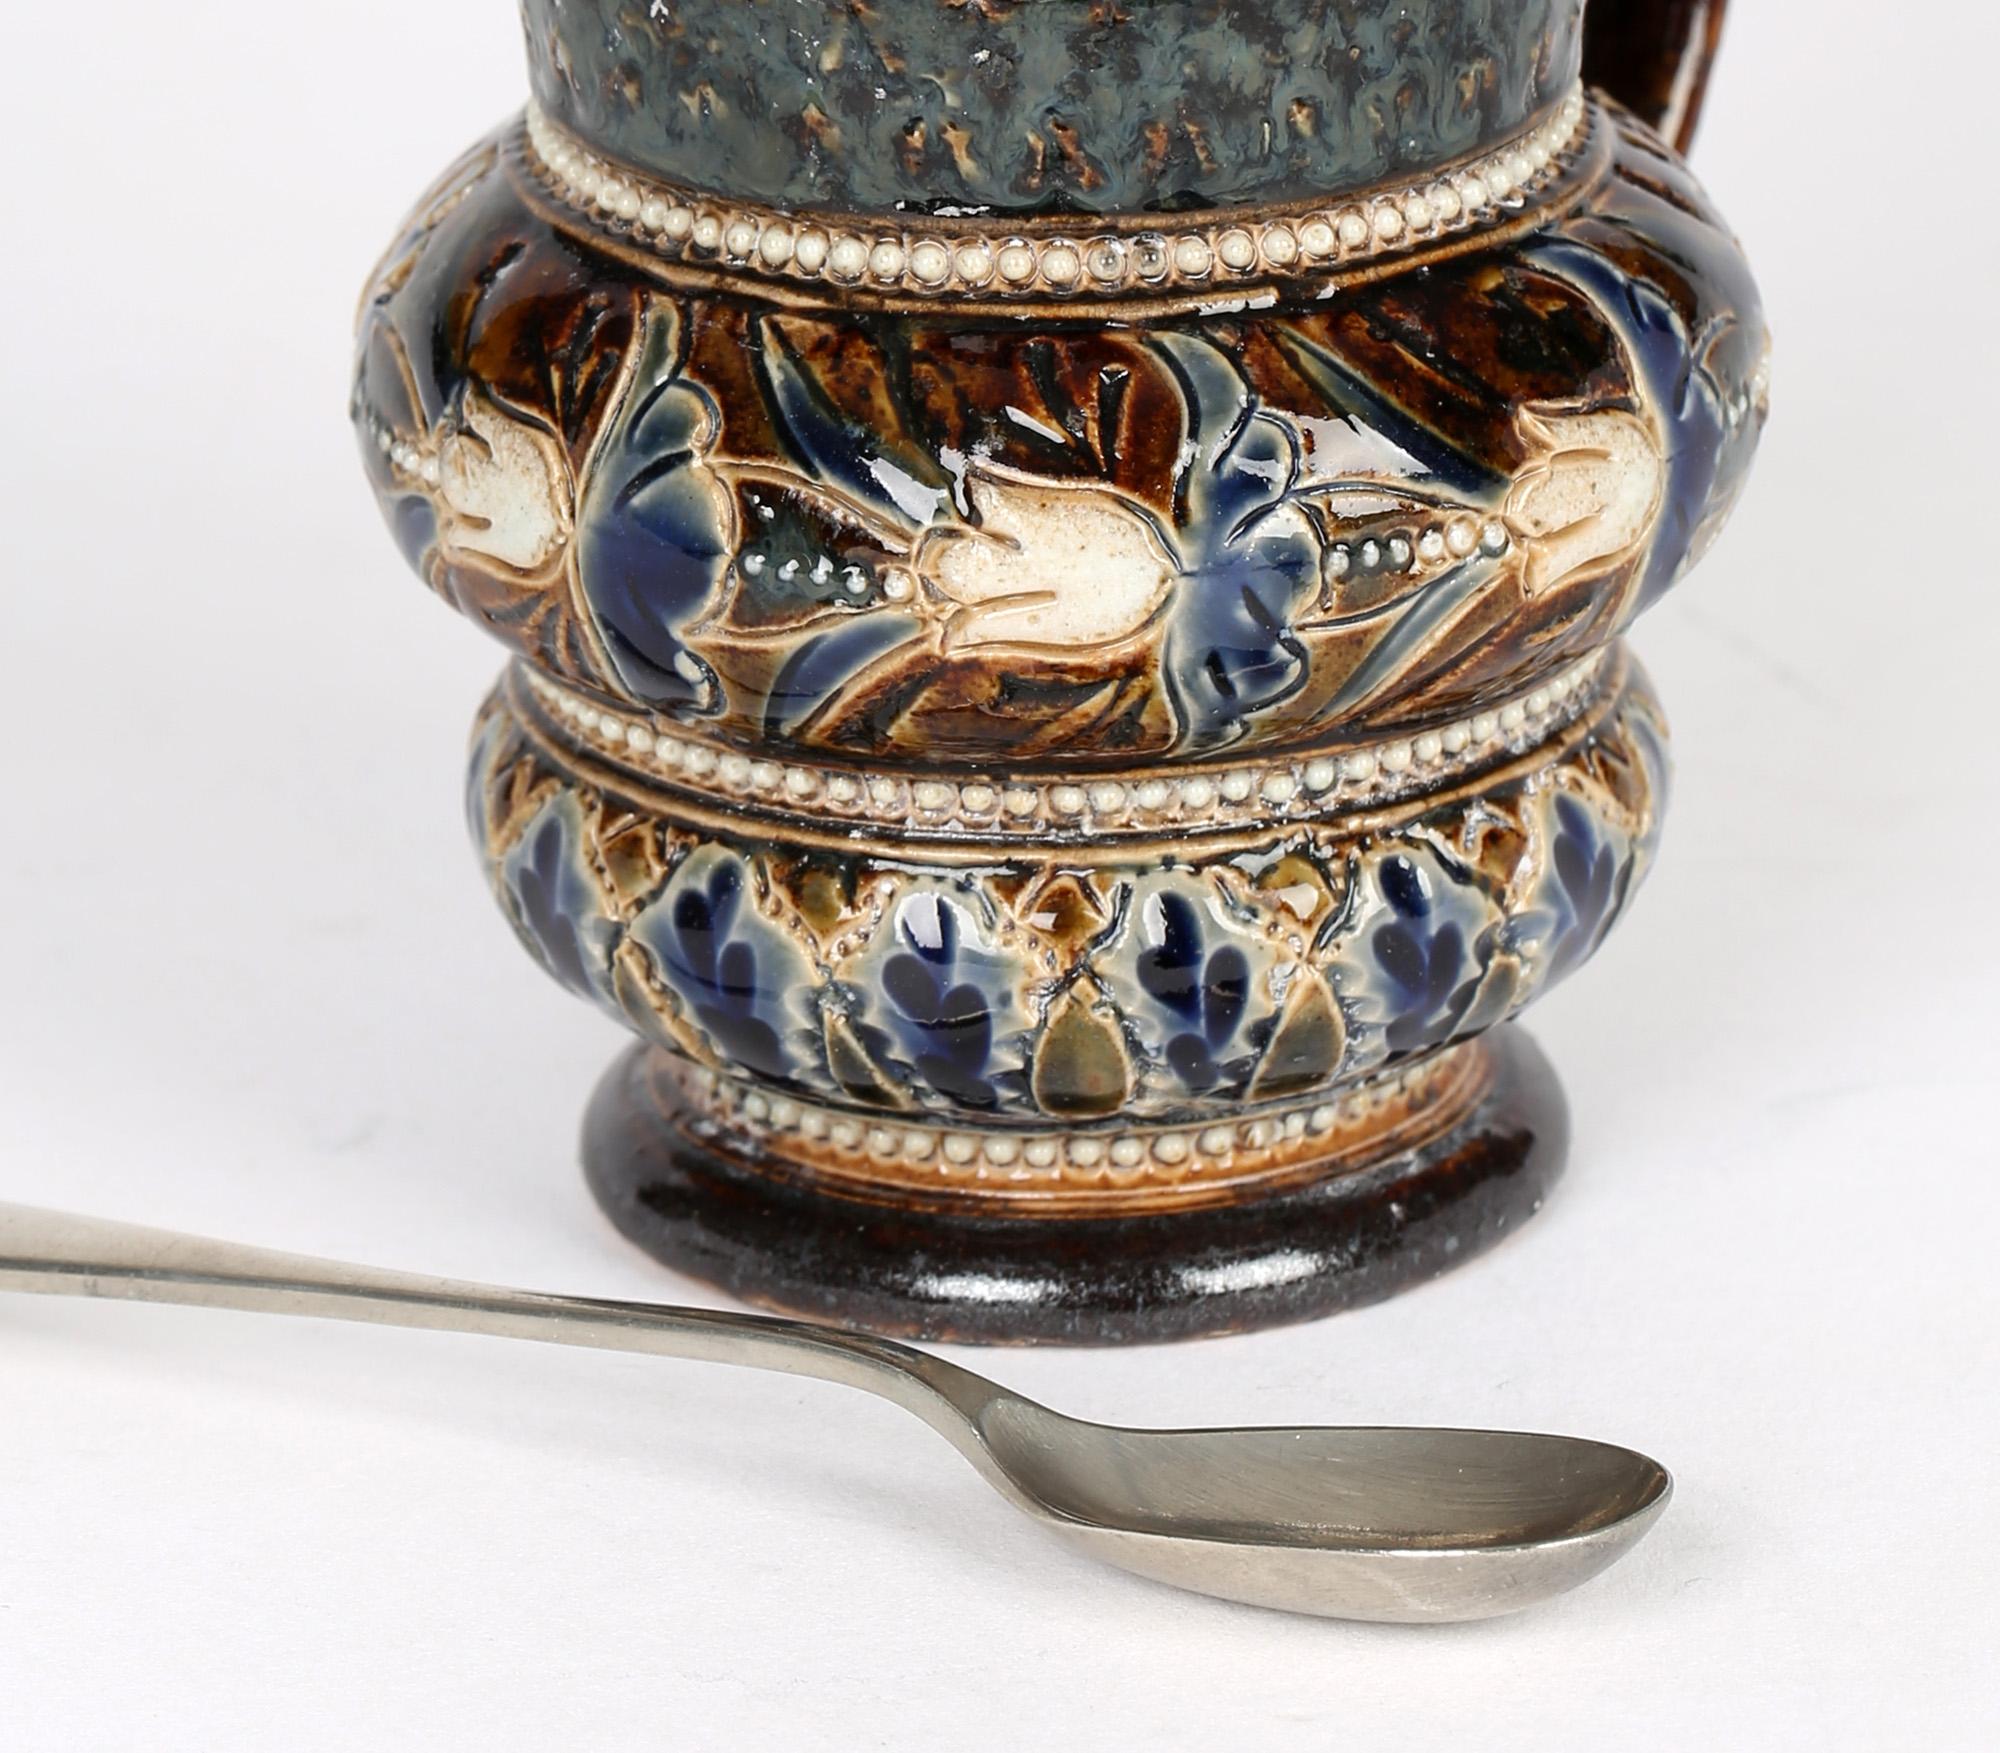 A fine and large Doulton Lambeth art pottery mustard pot with silver plated hinged cover by Emily Partington and dated 1880. The pot is of rounded shape with a loop handle applied to one side and stands on a narrow rounded pedestal foot with the